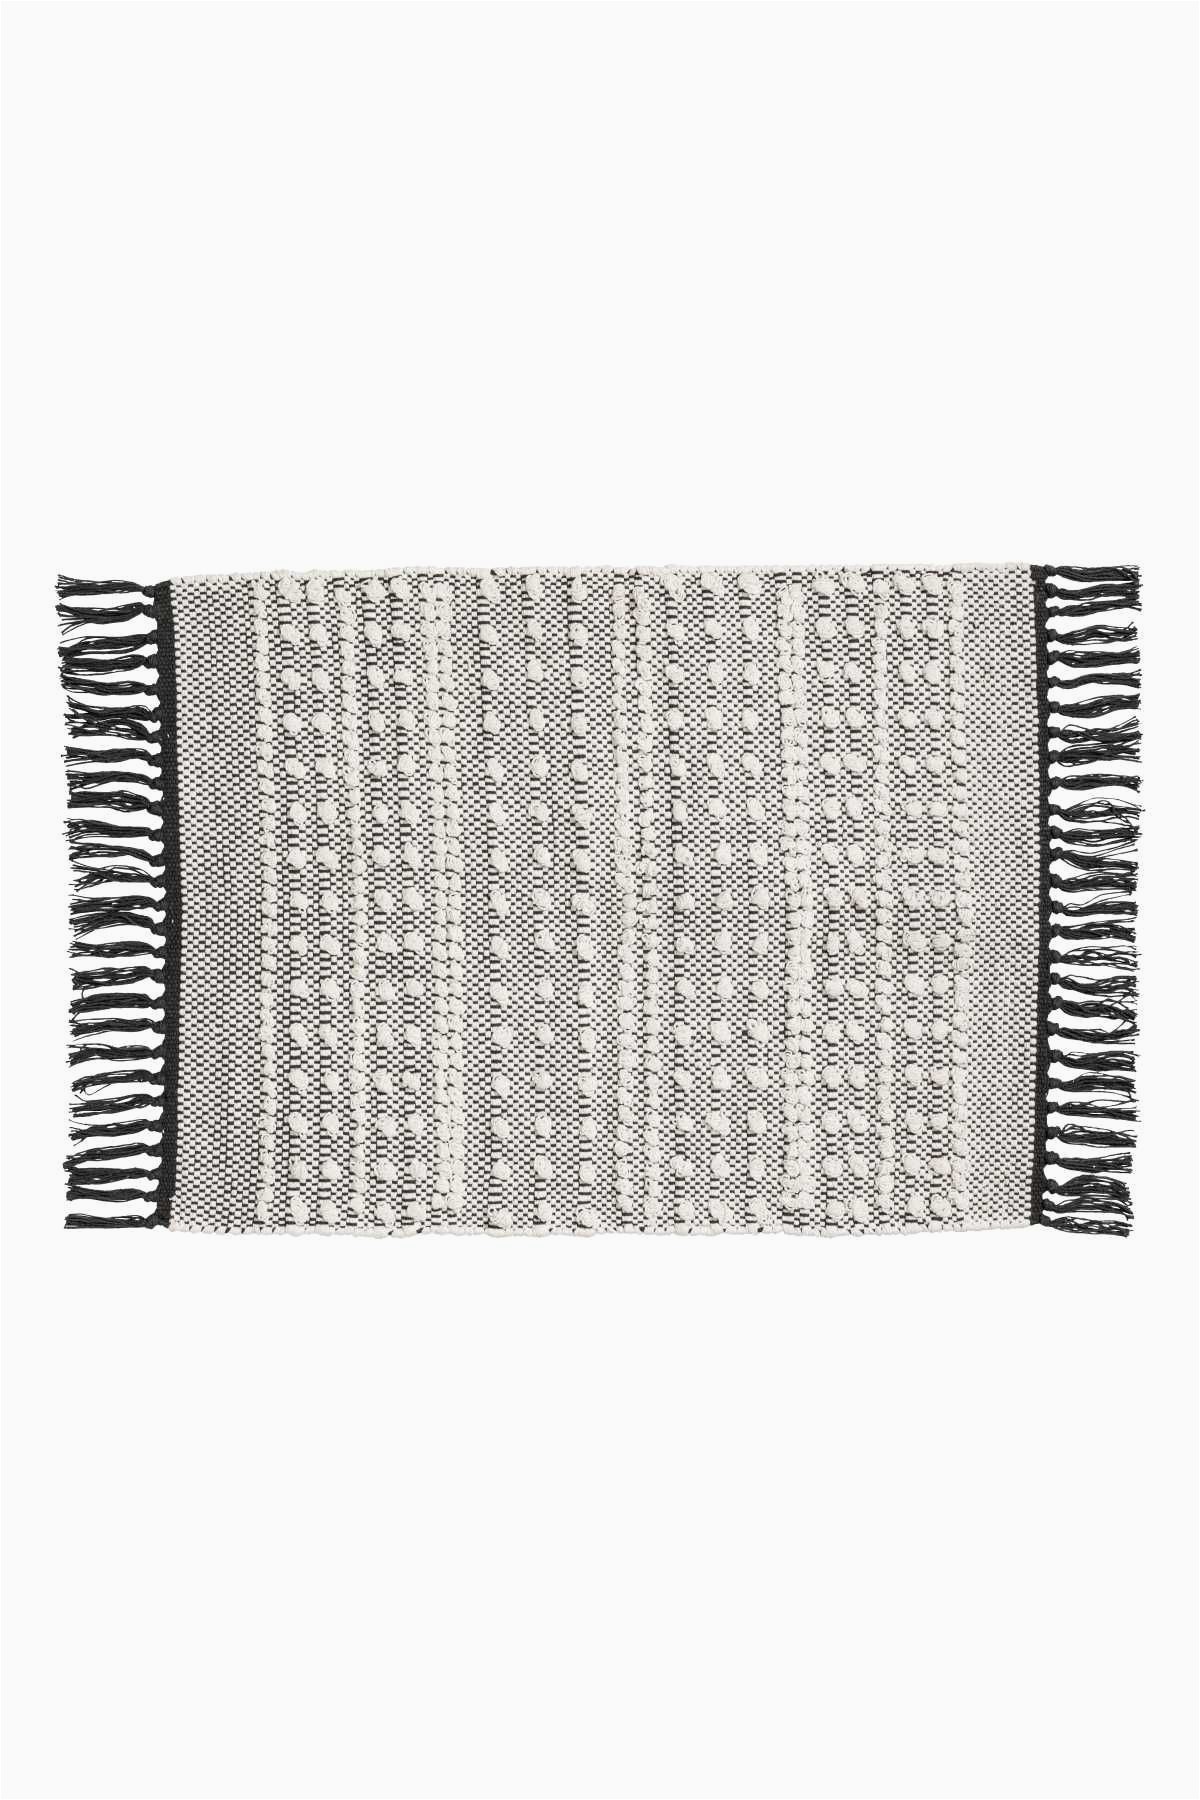 Project 62 Bath Rug White Charcoal Gray Bath Mat In Jacquard Weave Cotton